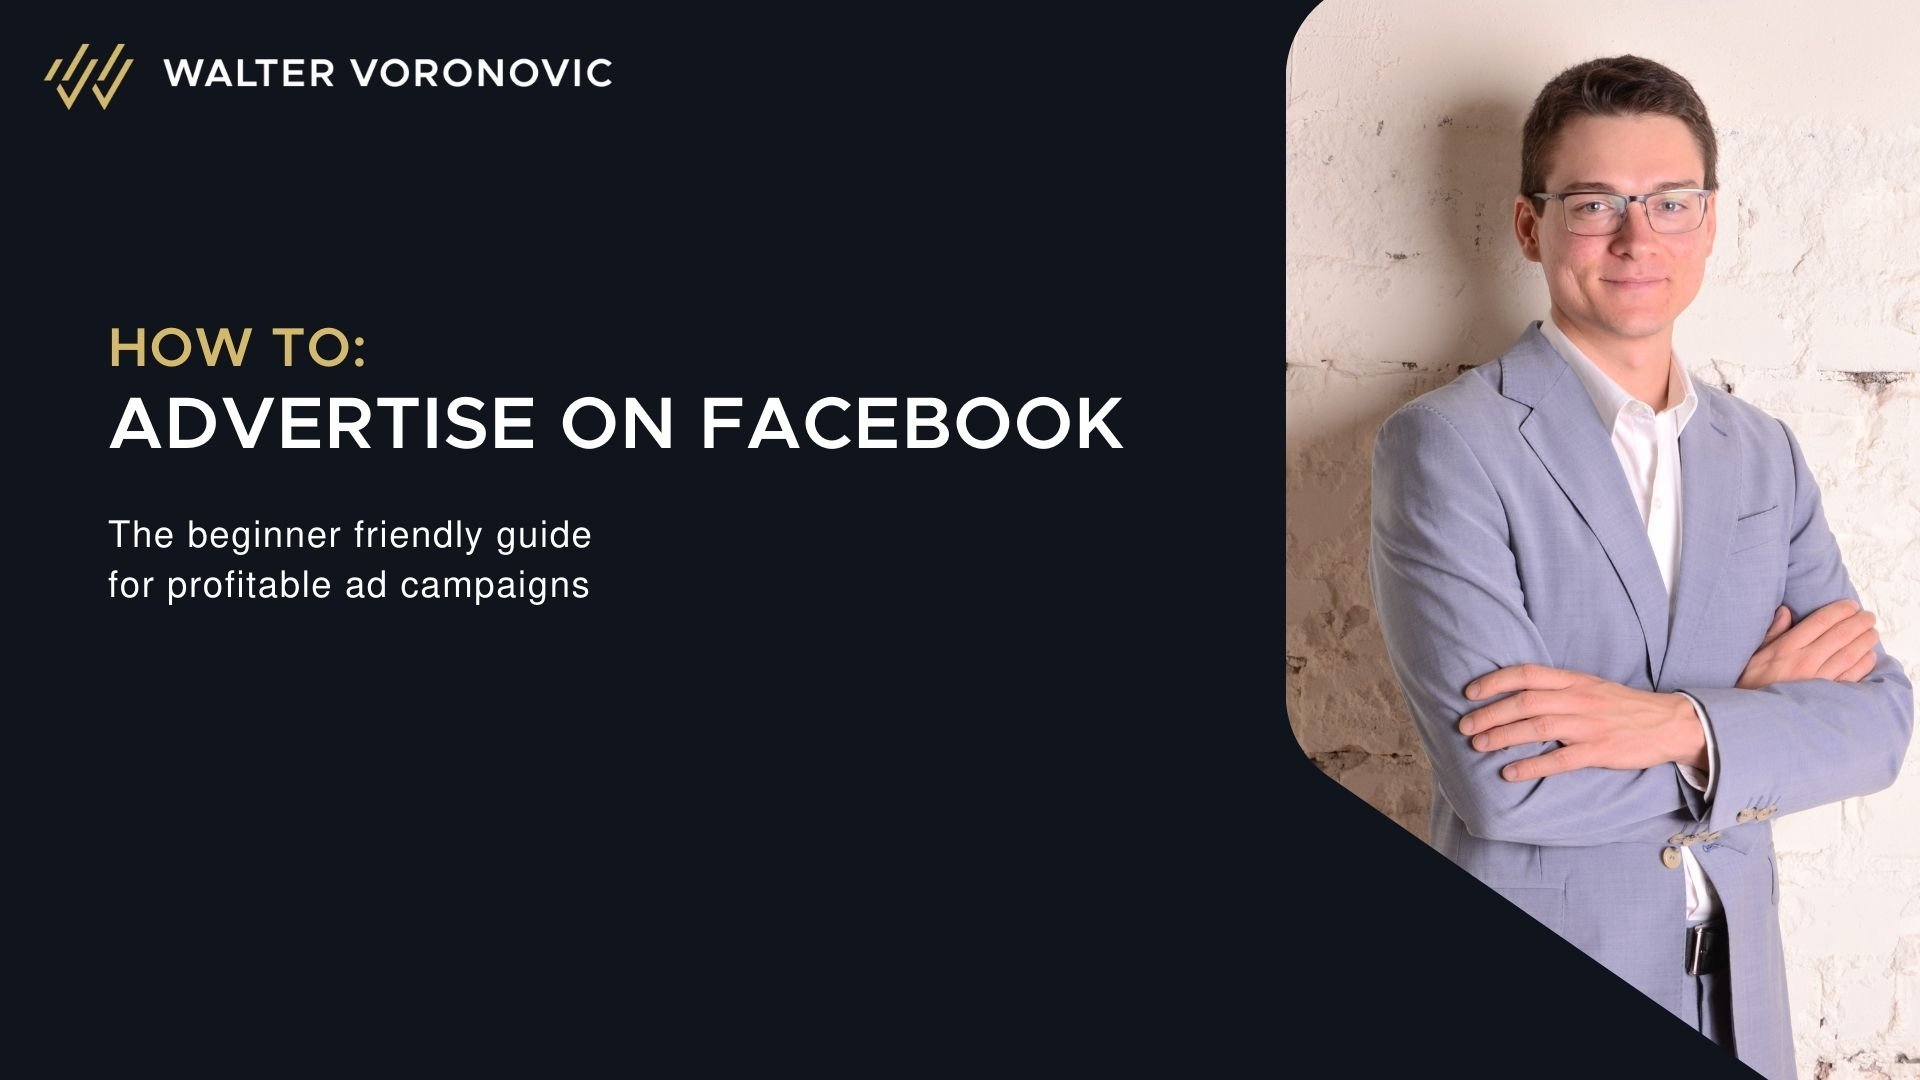 How to advertise on facebook: The ultimate guide to profitable ad campaigns, Facebook ads, Facebook ROI, Facebook ads manager, Facebook business suite